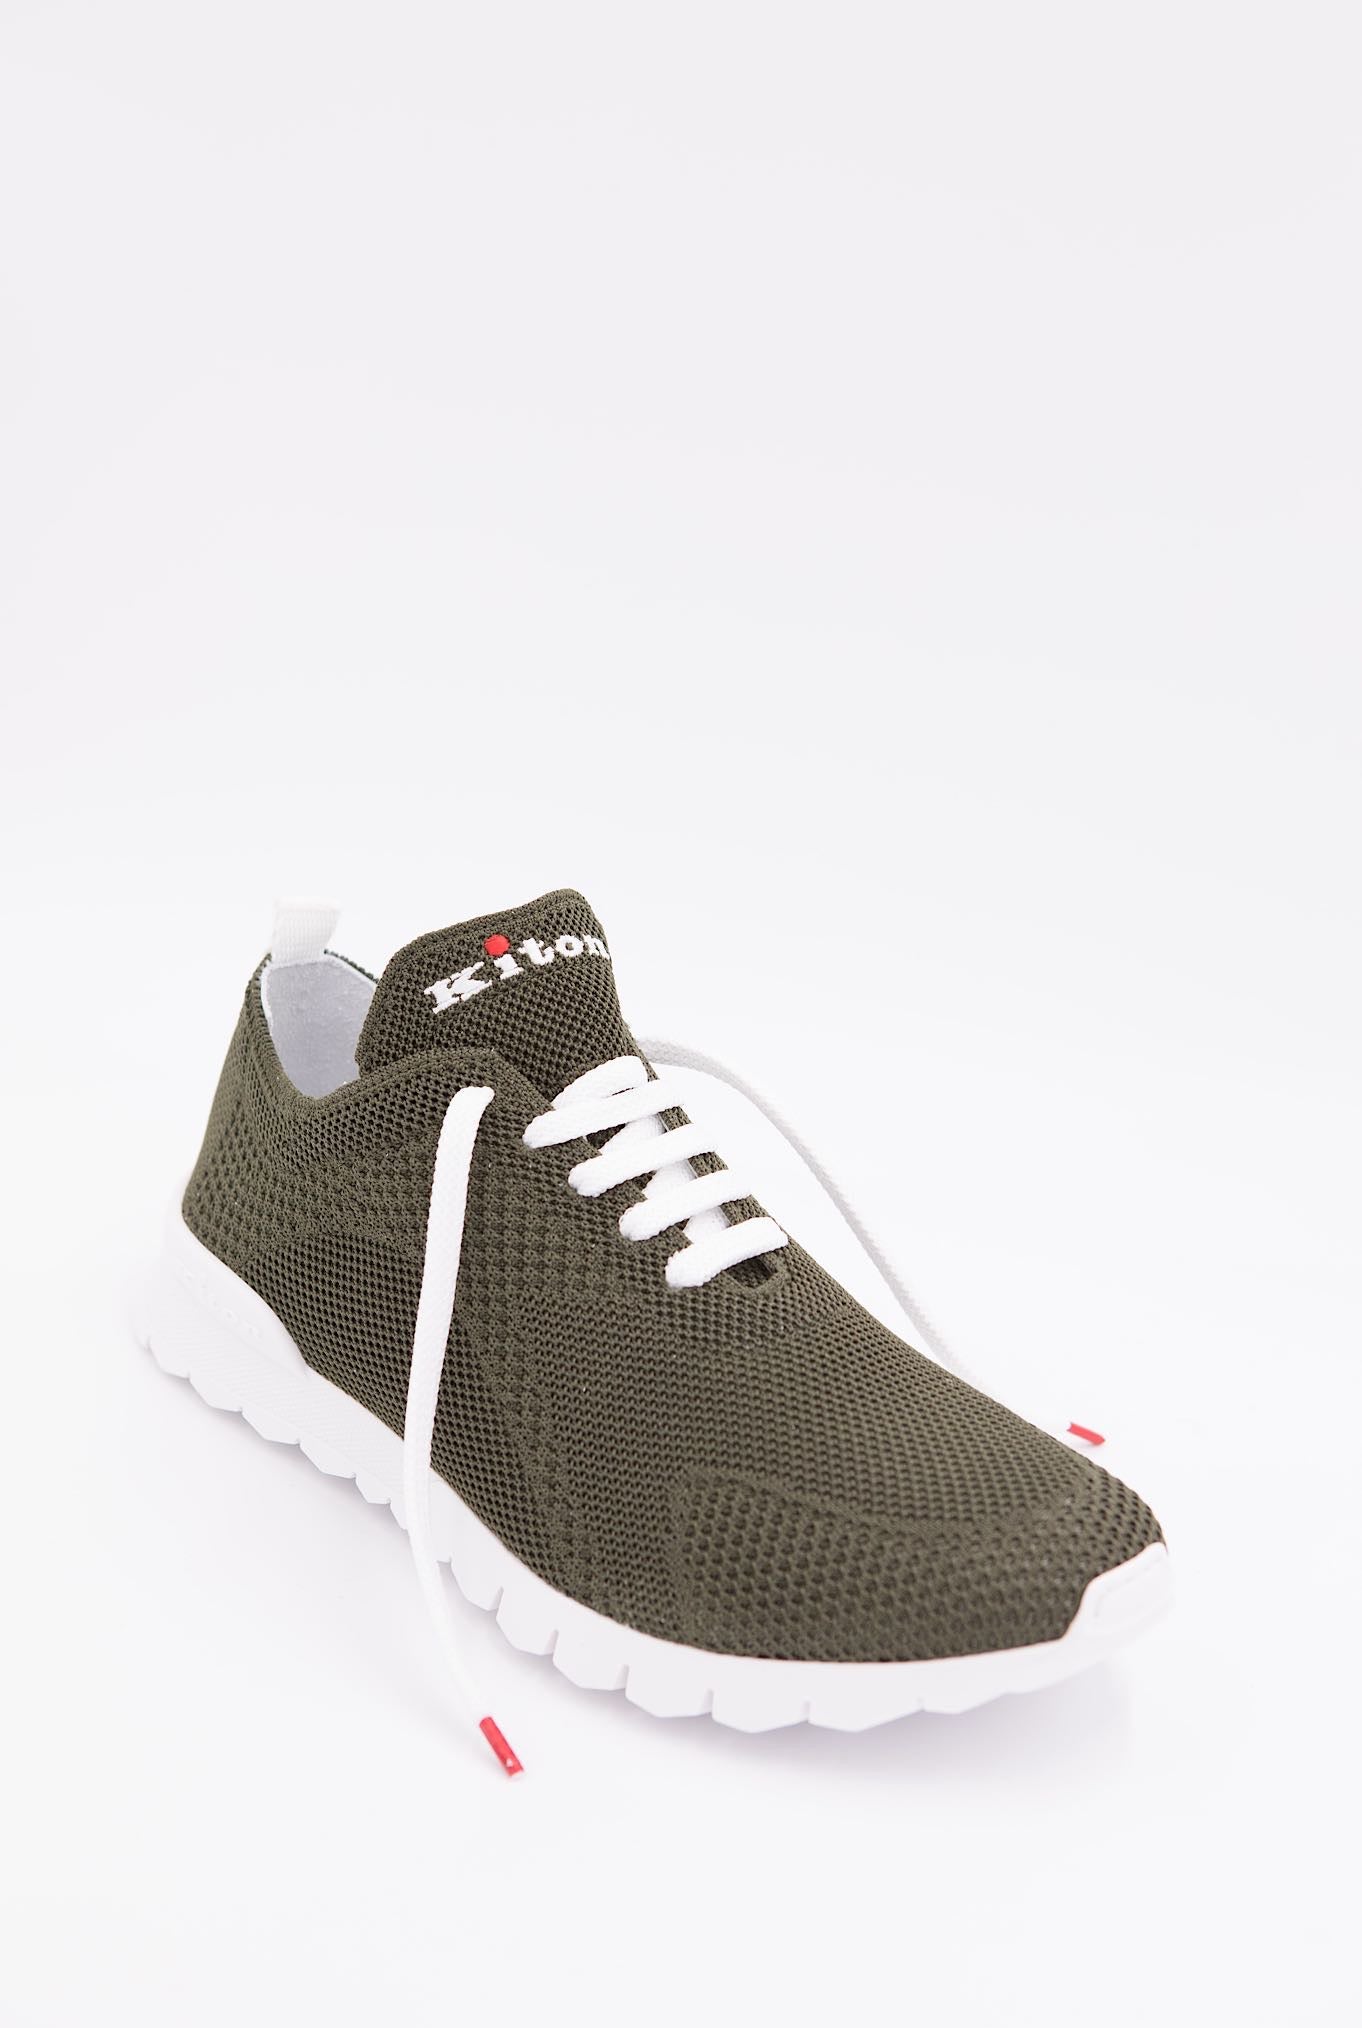 KITON Sneakers mod. Fit Verde Militare